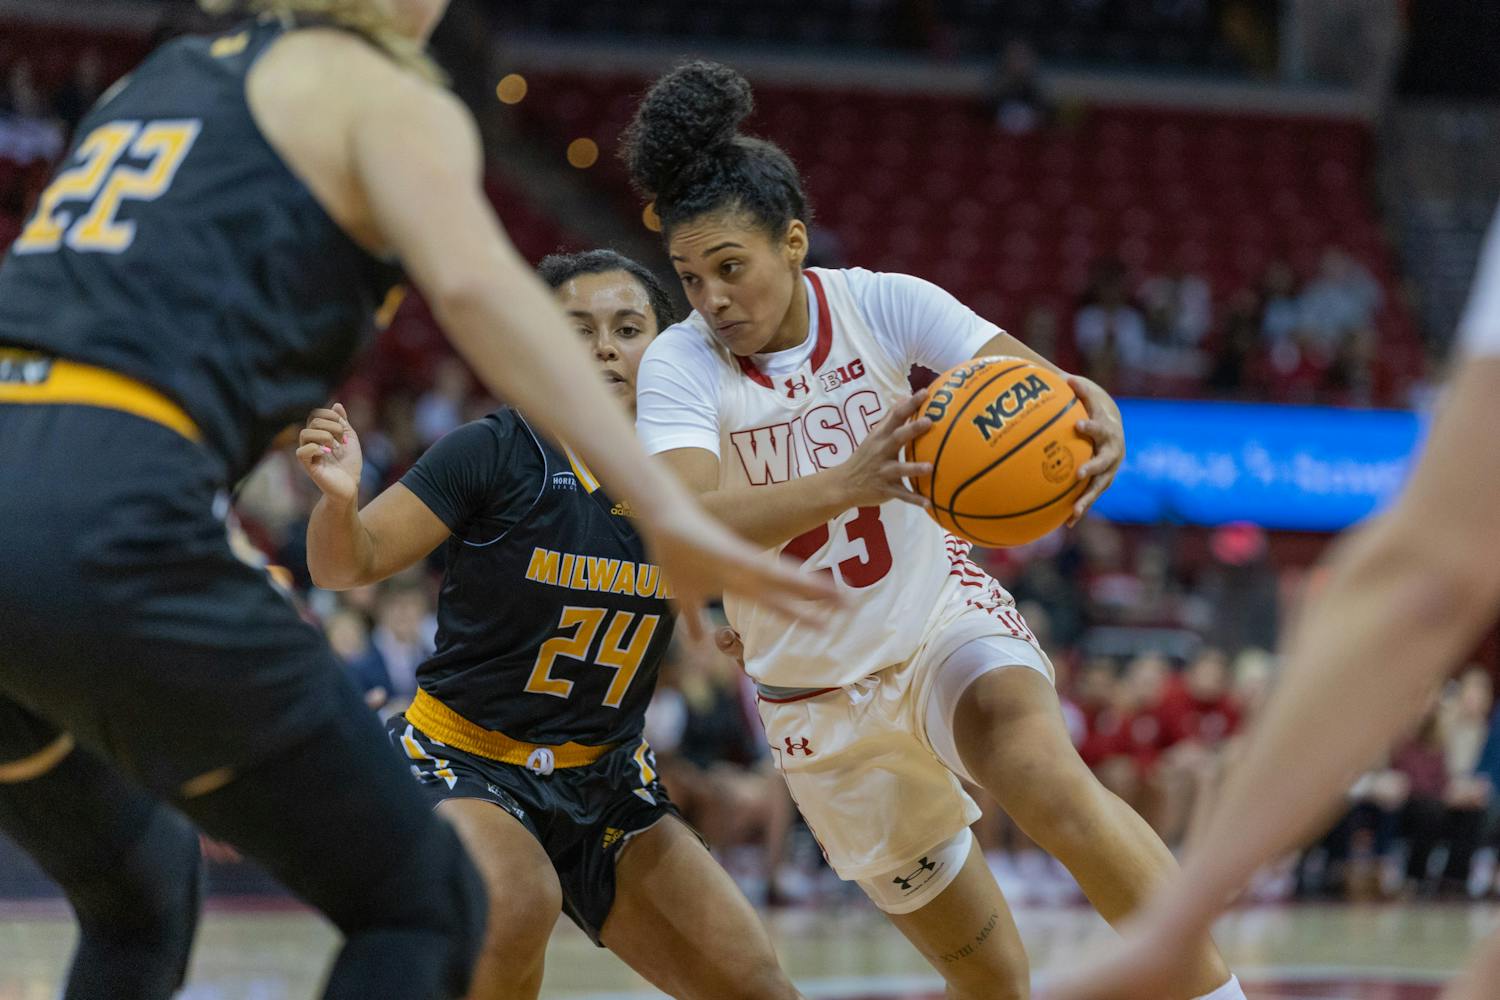 PHOTOS: Another season opener, another Badger win. Wisconsin Women's Basketball celebrate victory over Milwaukee, 62-51